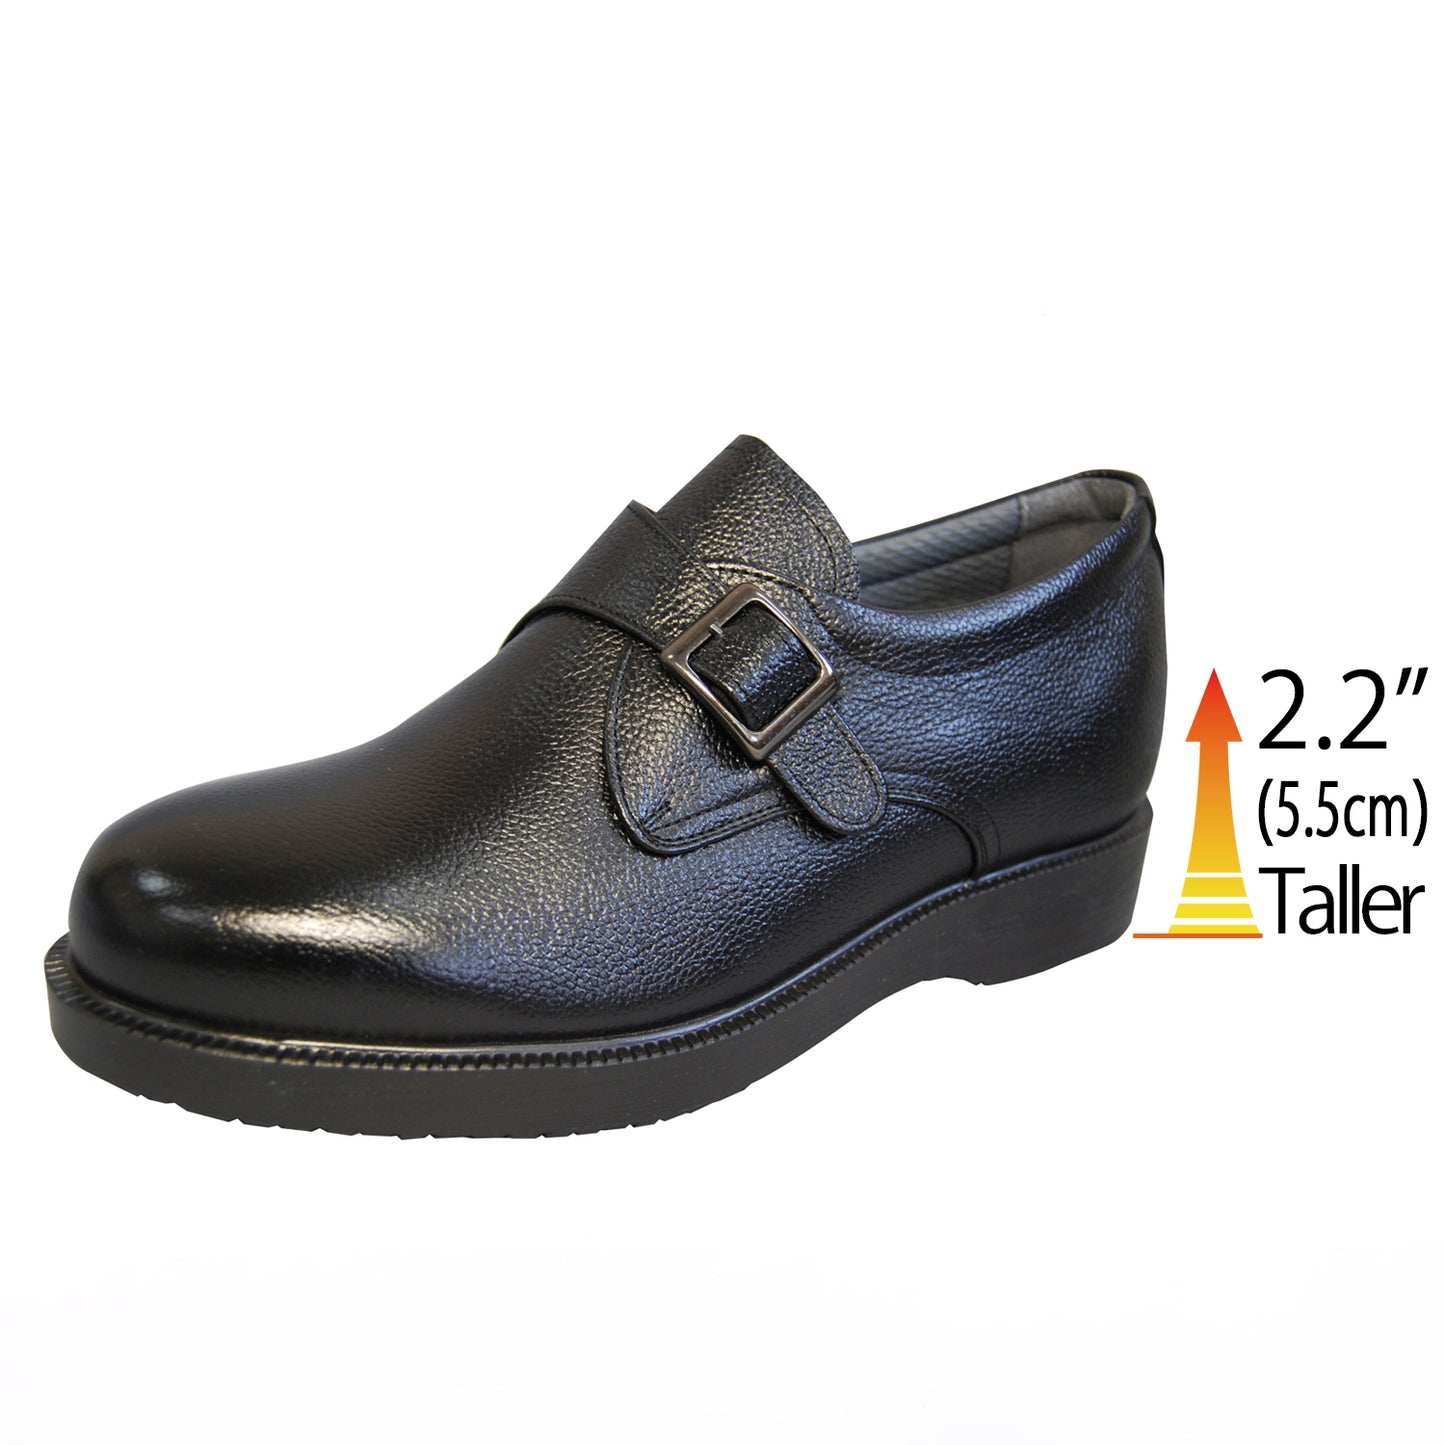 Men's Elevator Shoes Height Increasing 2.2" Taller Single Monk Strap Slip on Plain Toe Wide Genuine Leather No. 921